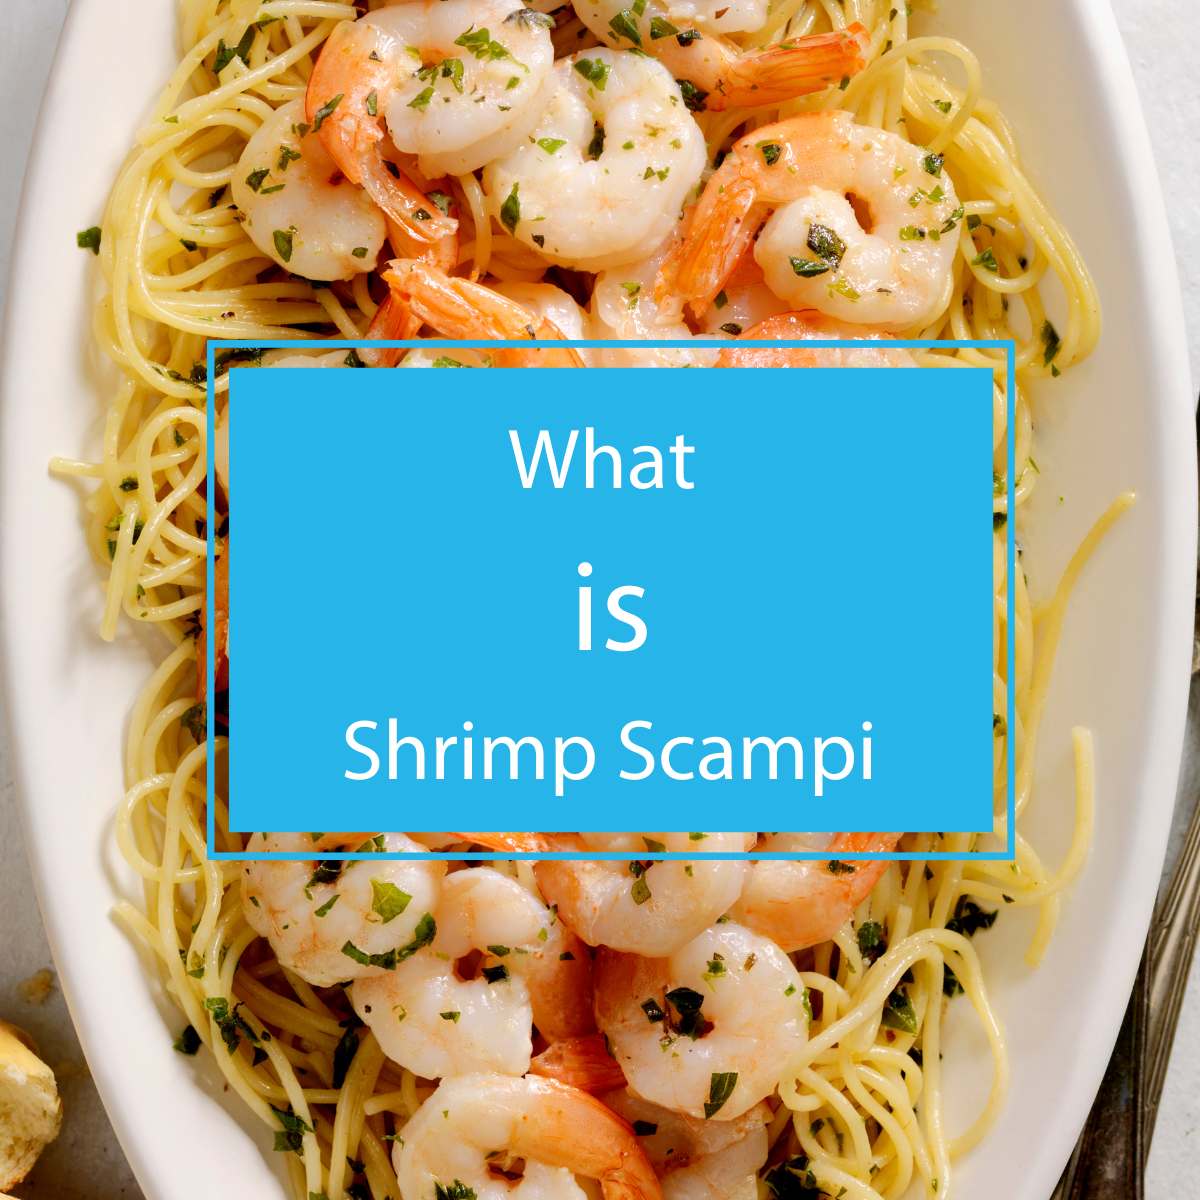 What is shrimp scampi